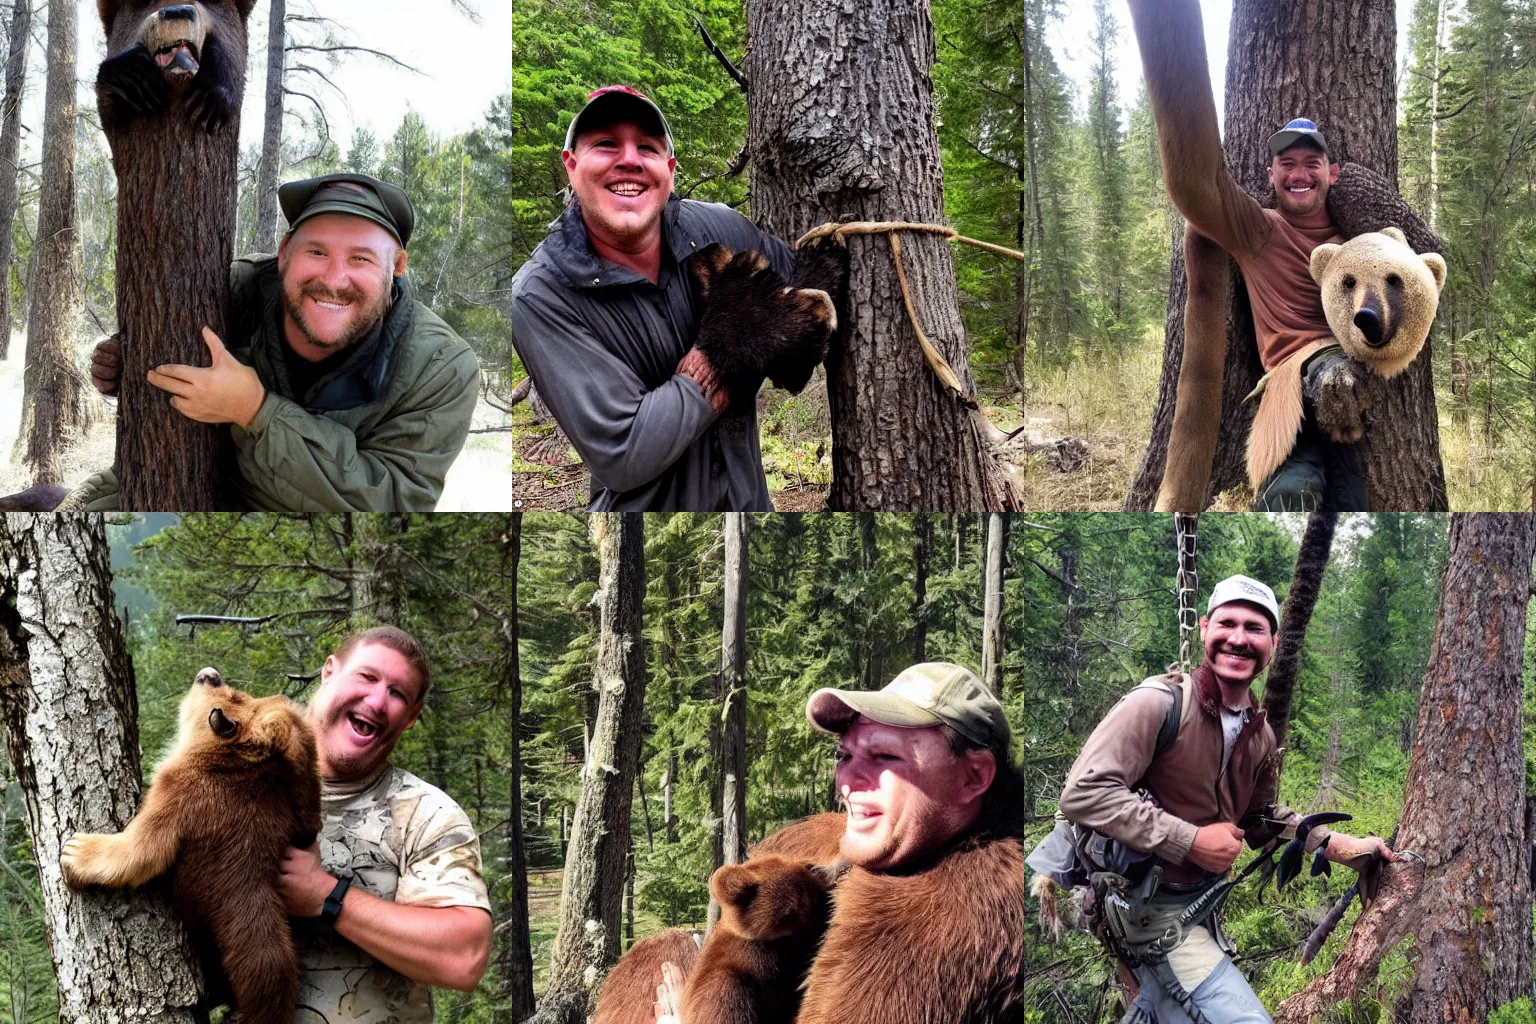 Prompt: Photo, A Hunter with a big smile because he killed a big bear, the bear is hanging from a tree